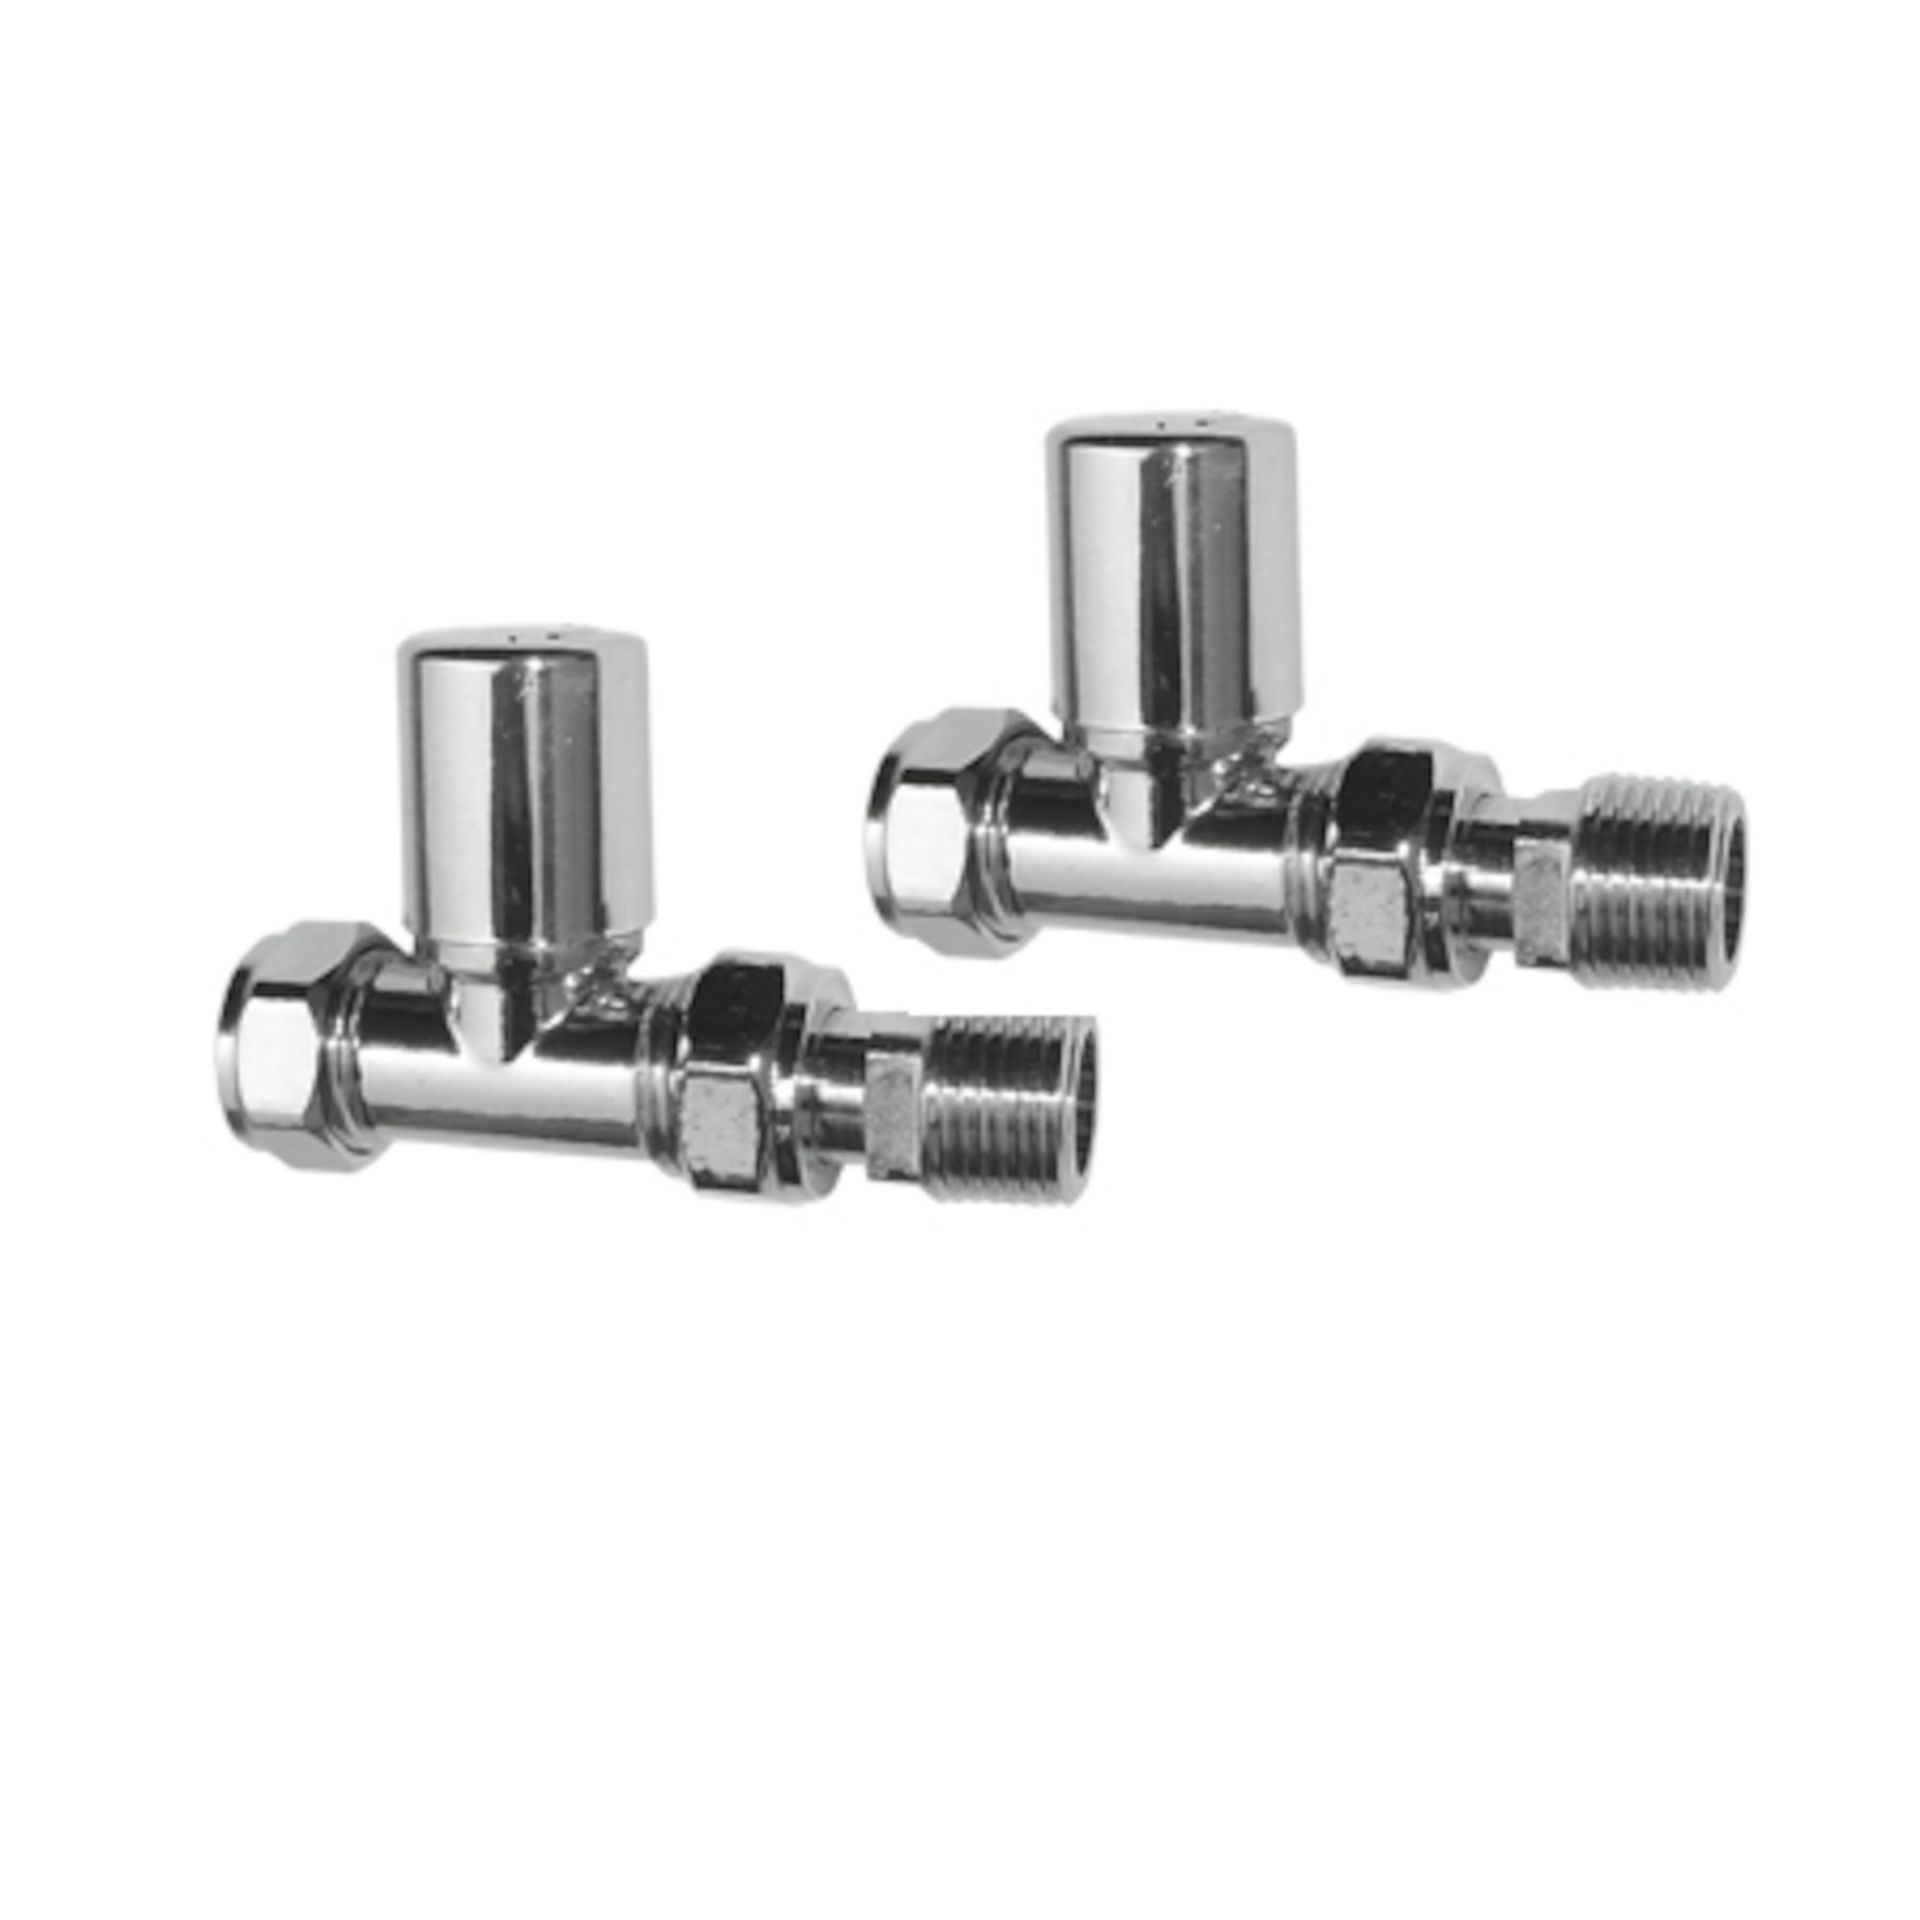 (MP80) Standard 15mm Connection Straight Chrome Radiator Valves Chrome Plated Solid Brass Straight - Image 2 of 3